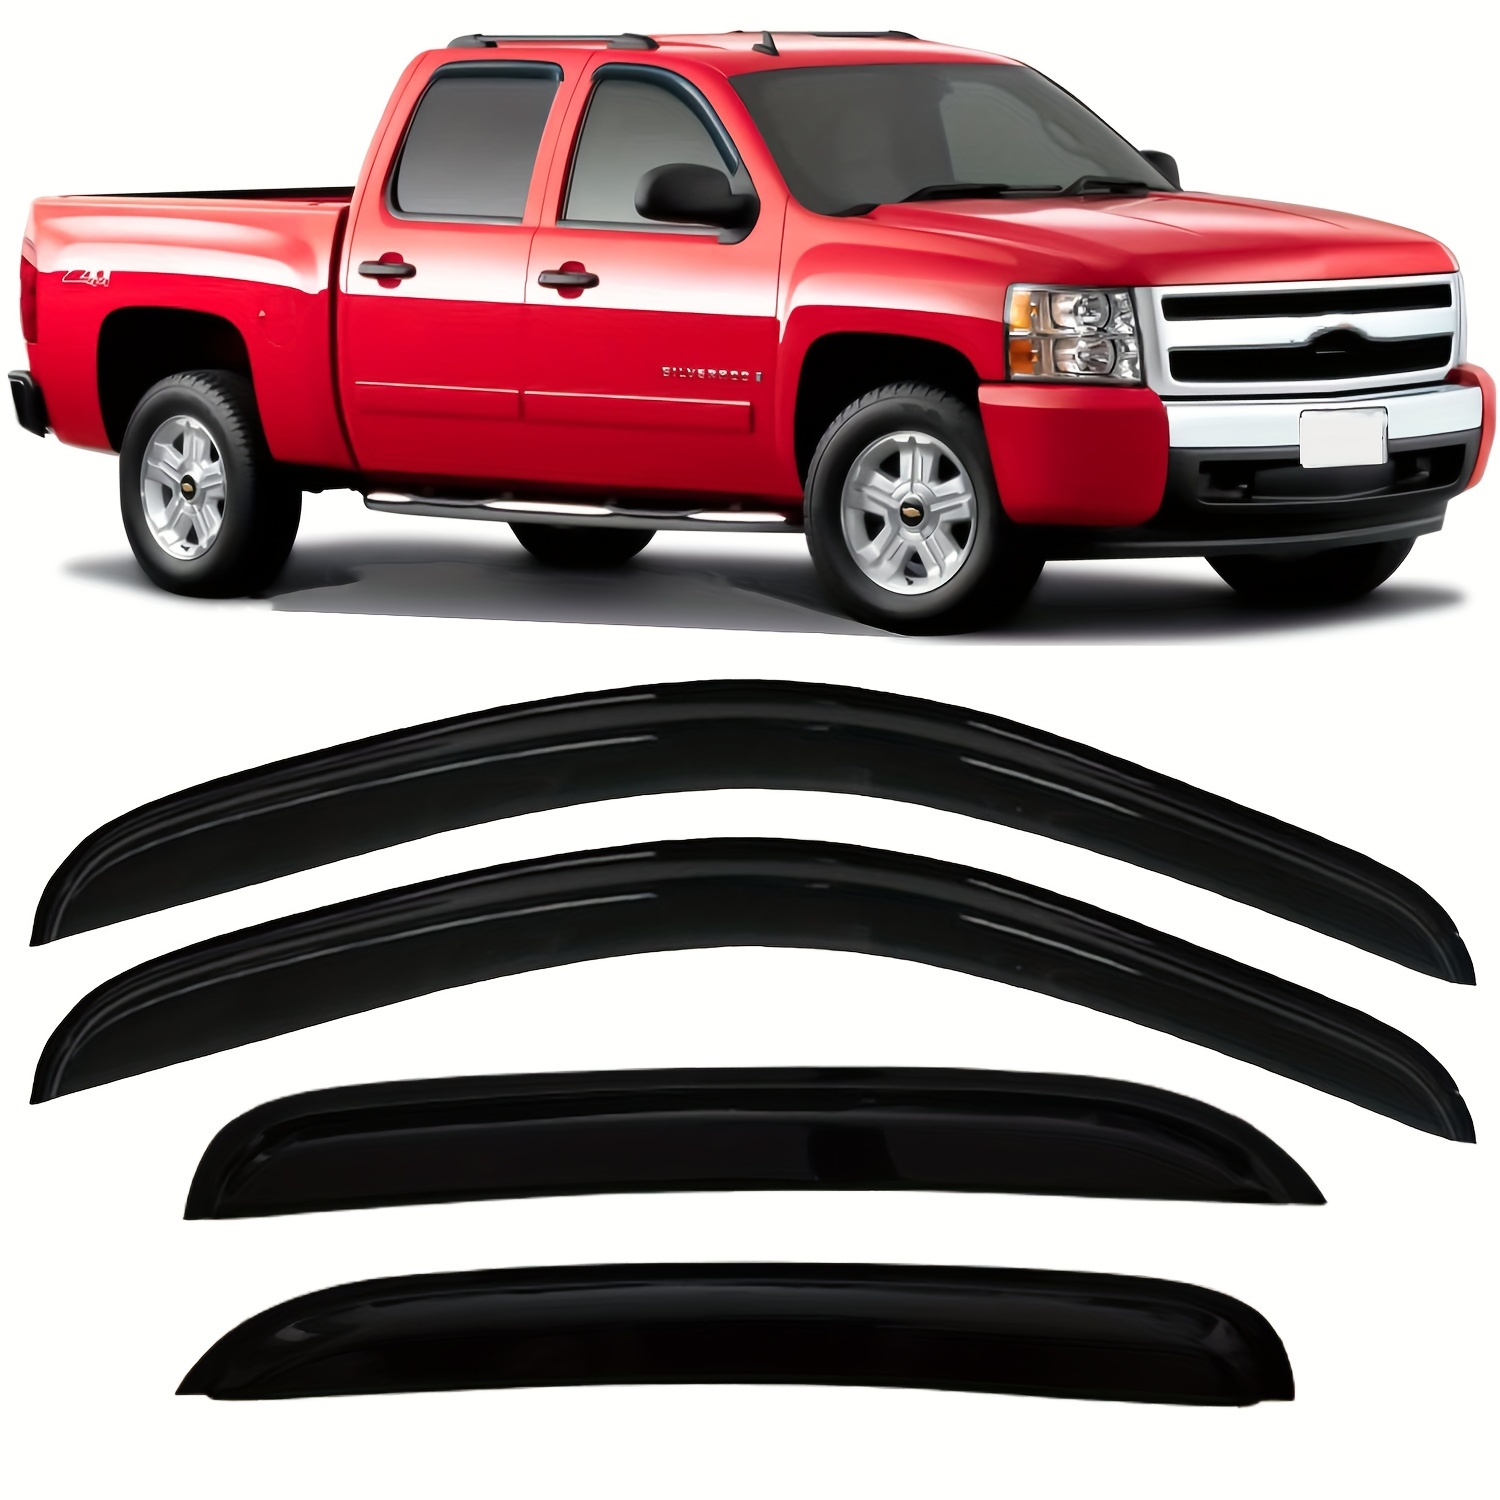 

Tape On Side Car Window Visors Vent Wind Deflectors Rain Guards For For 07-14 & For For 1500 2500hd 3500hd Crew Cab, For For For Xl, 94515 4pcs